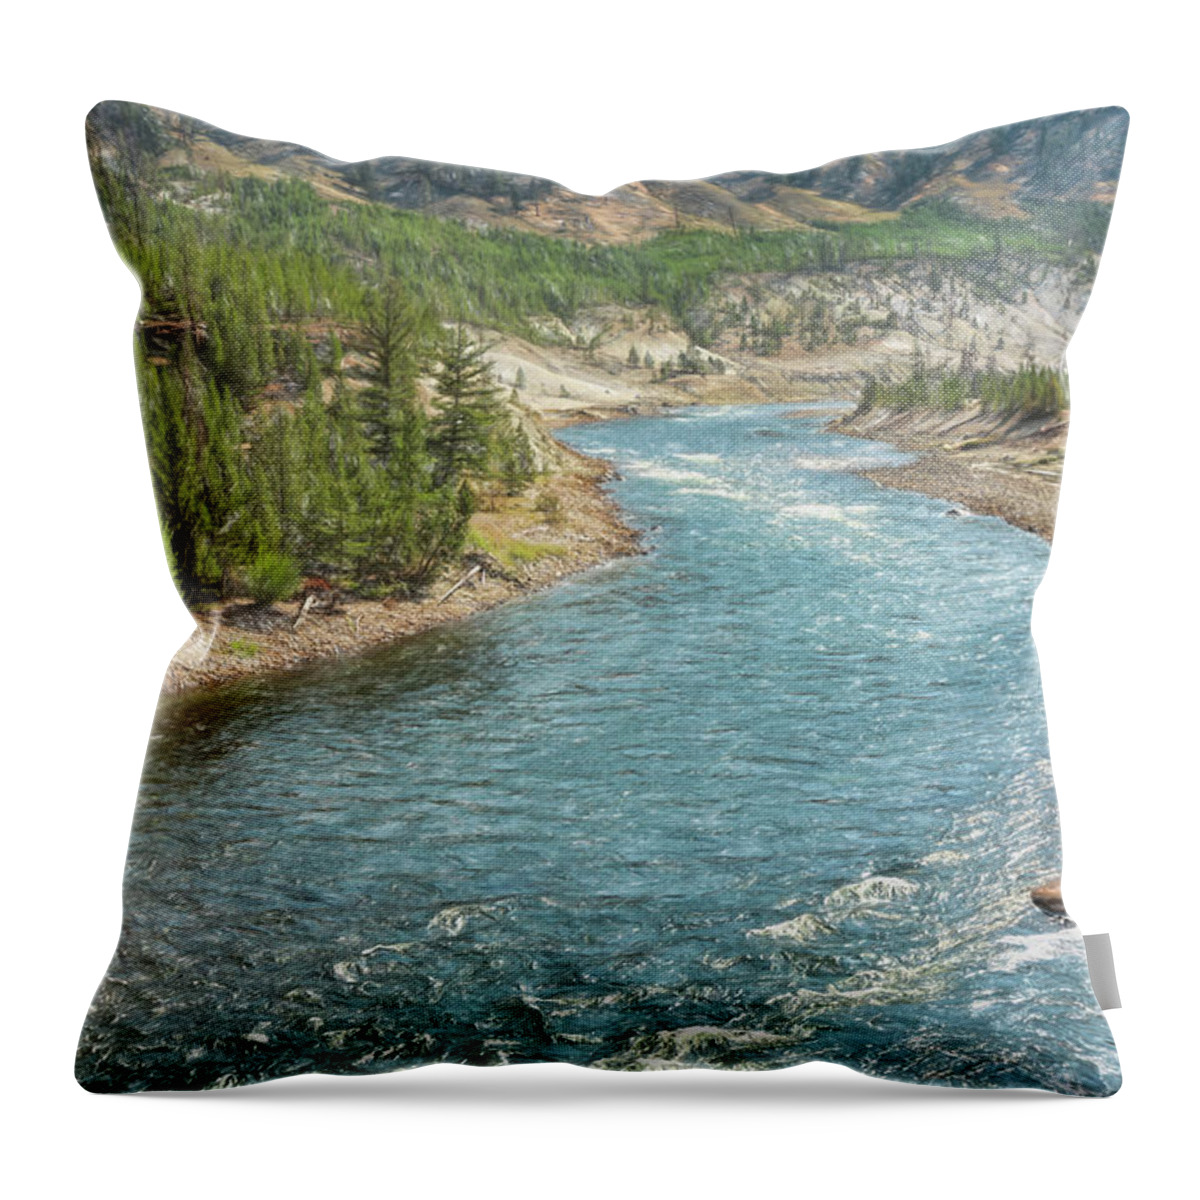 Landscape Throw Pillow featuring the photograph River Free by John M Bailey